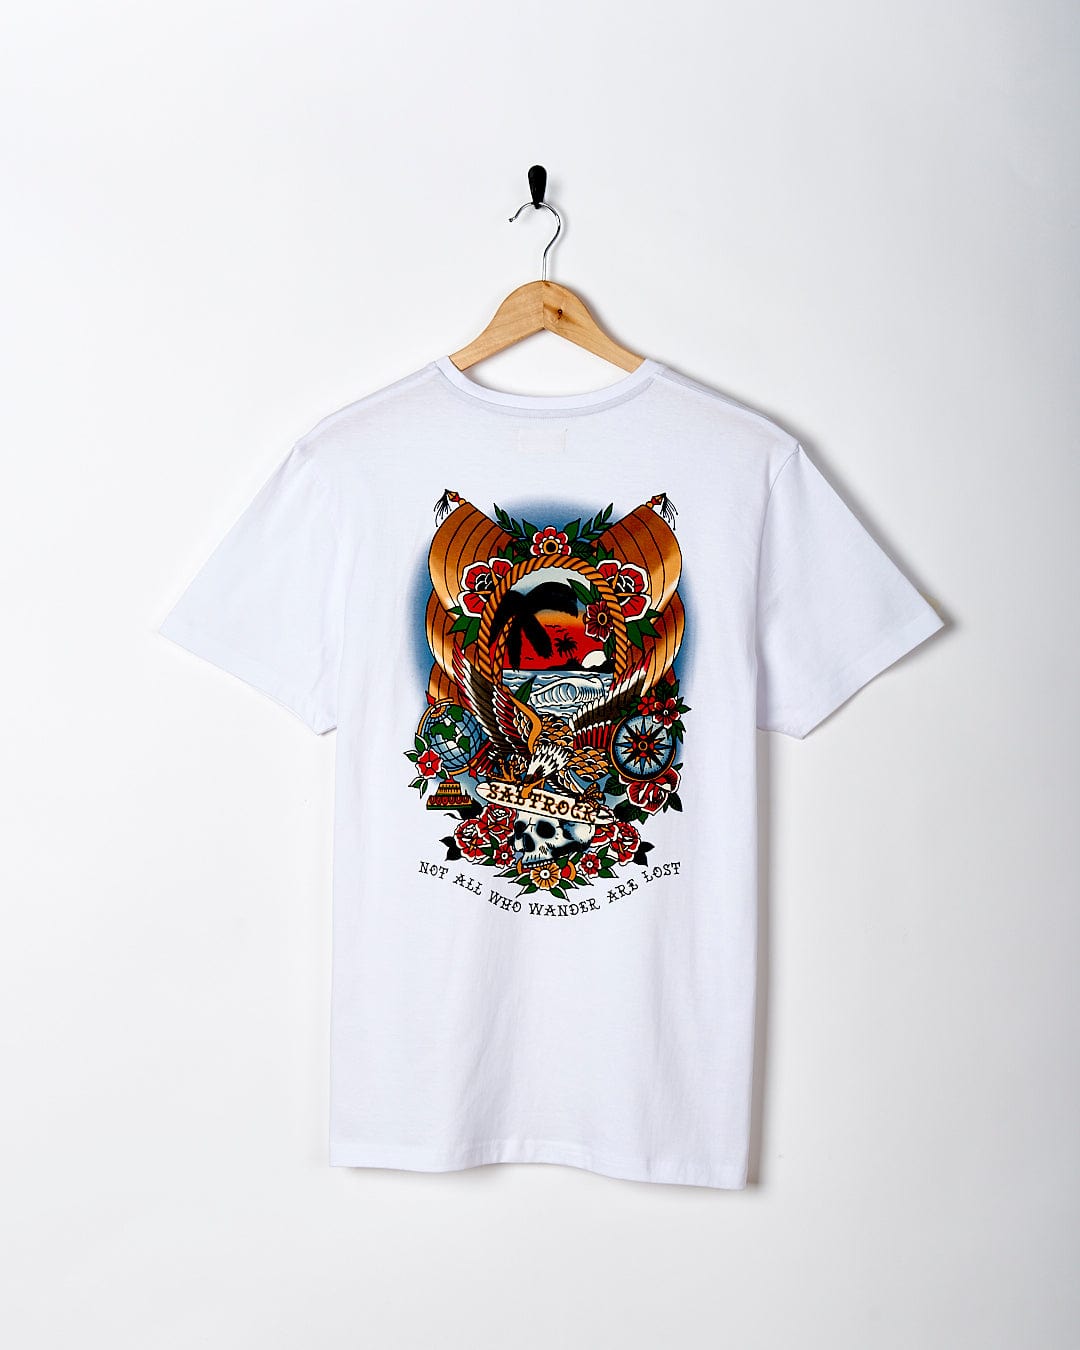 A Saltrock Tattoo Island Mens Short Sleeve T-Shirt in White with an image of a tiger on it.